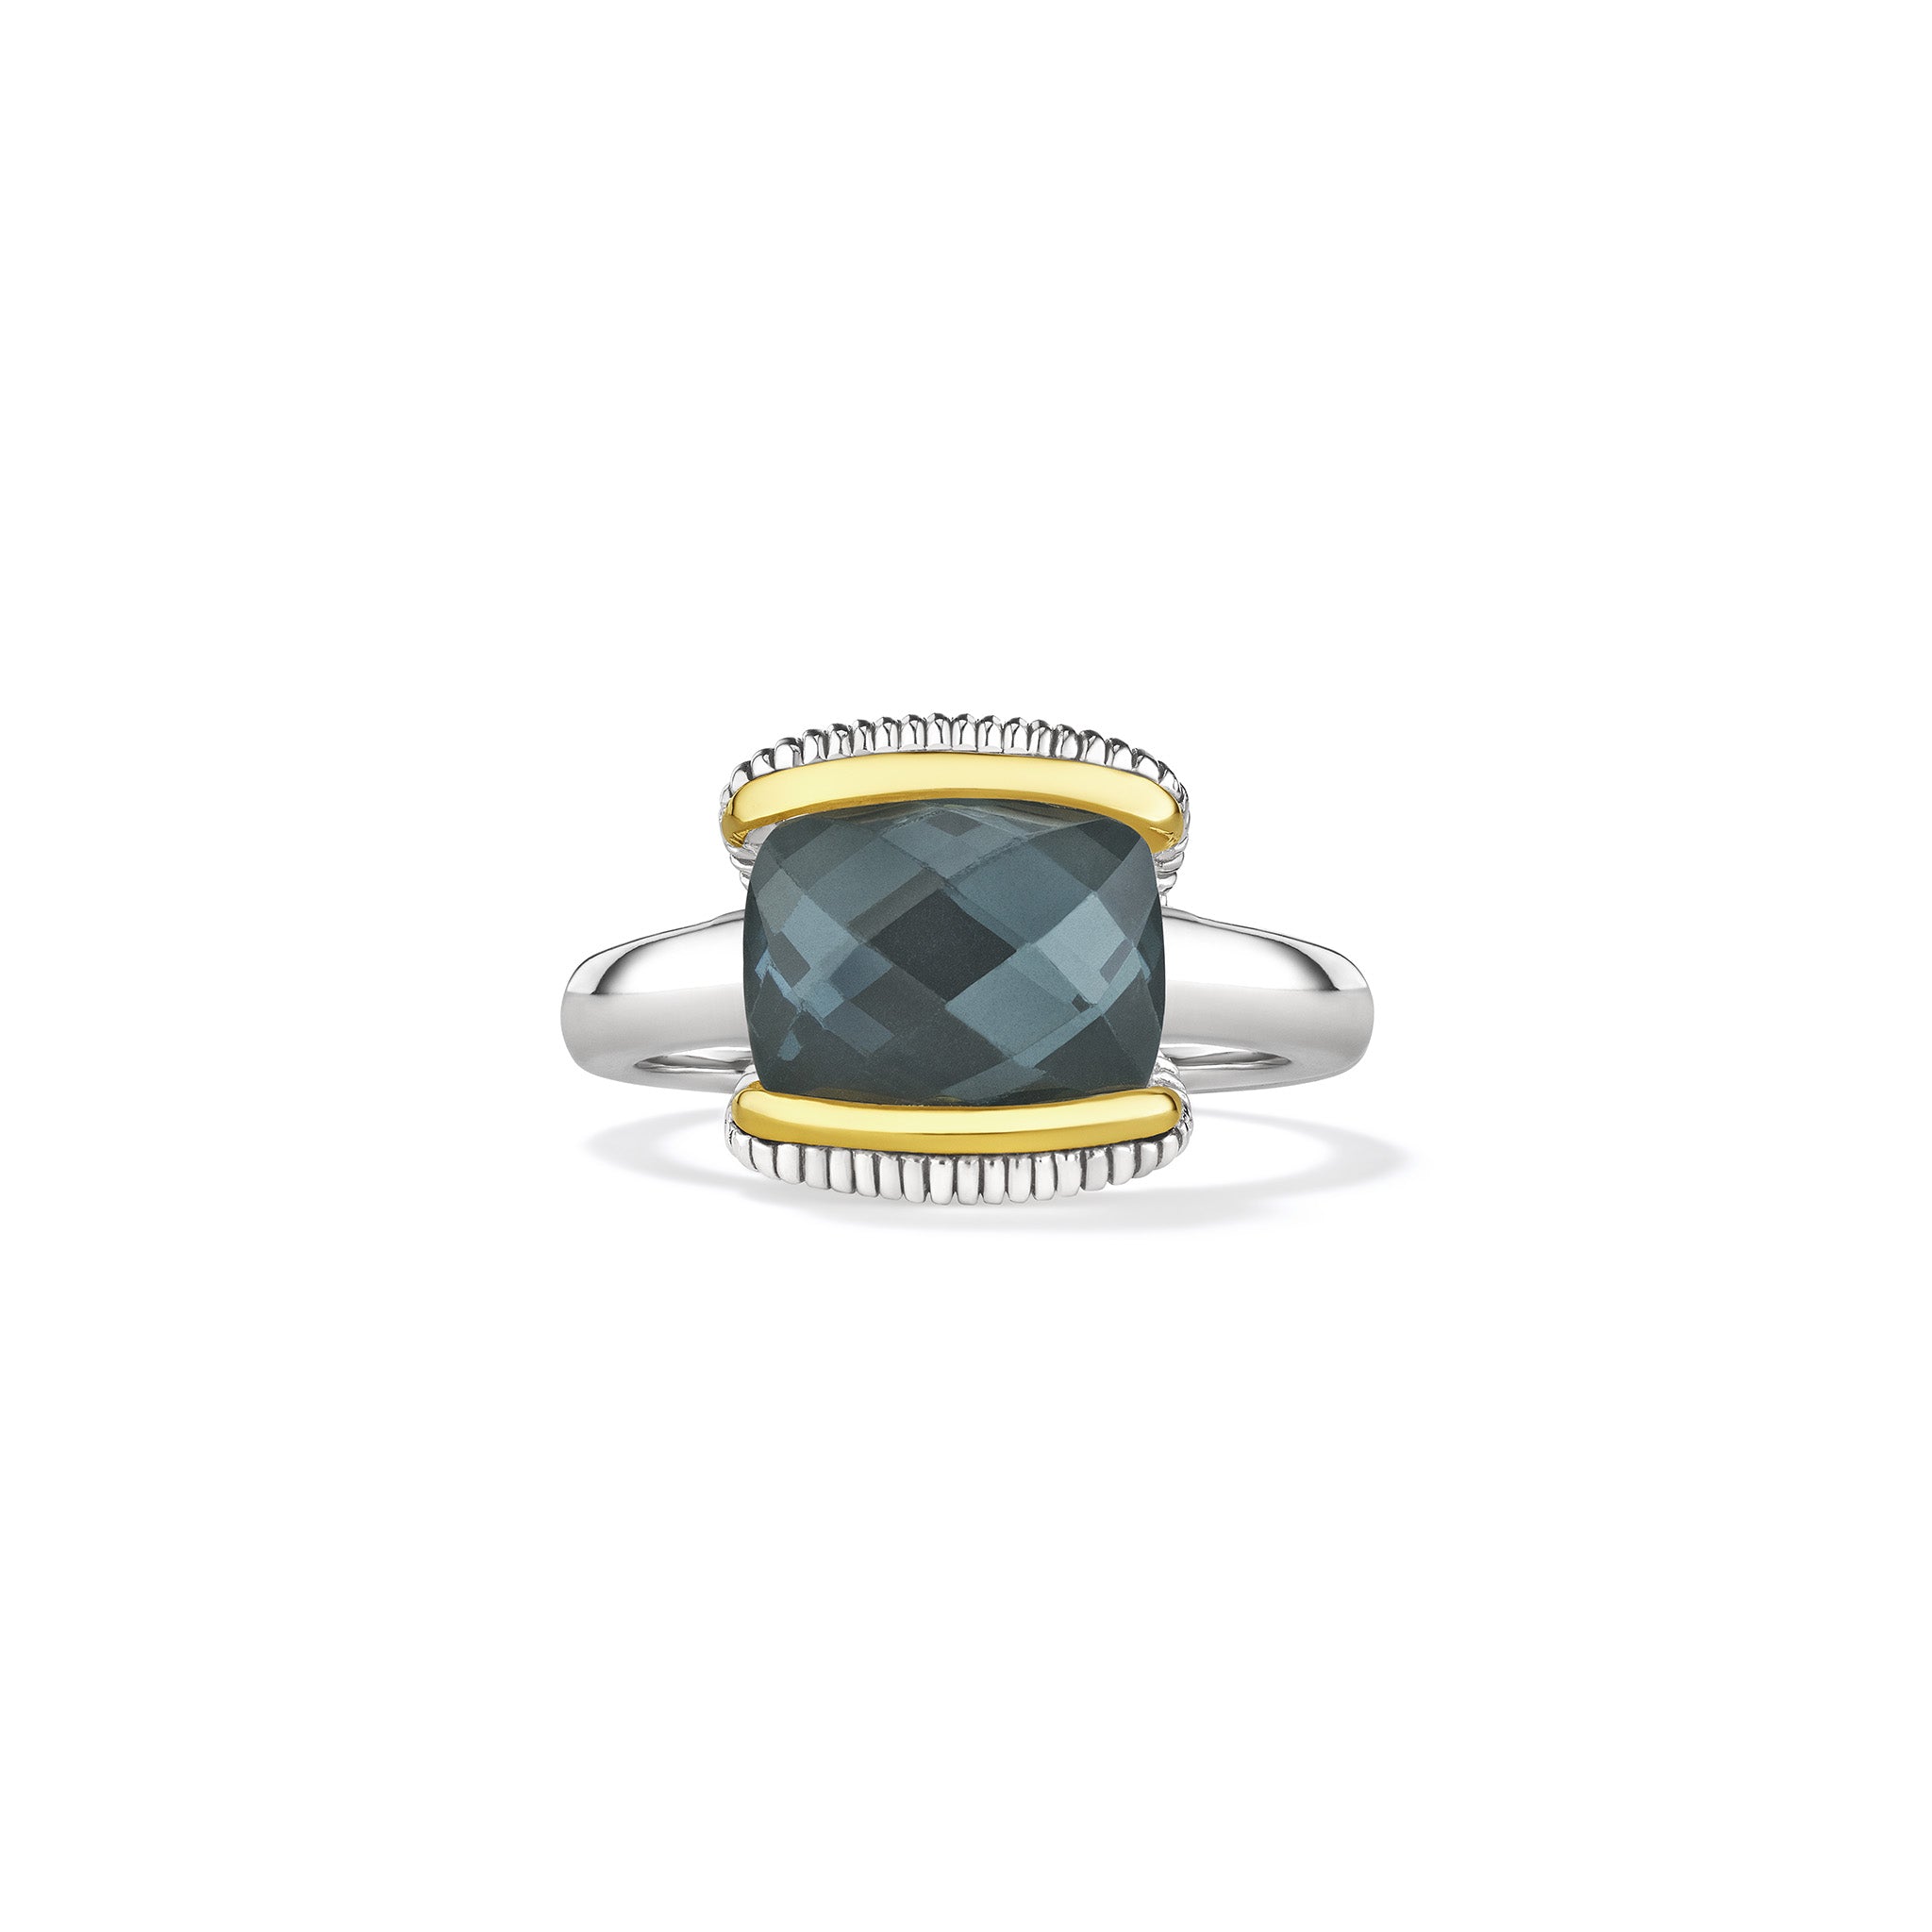 Eternity Ring With Blue Quartz Over Hematite Doublet And 18K Gold